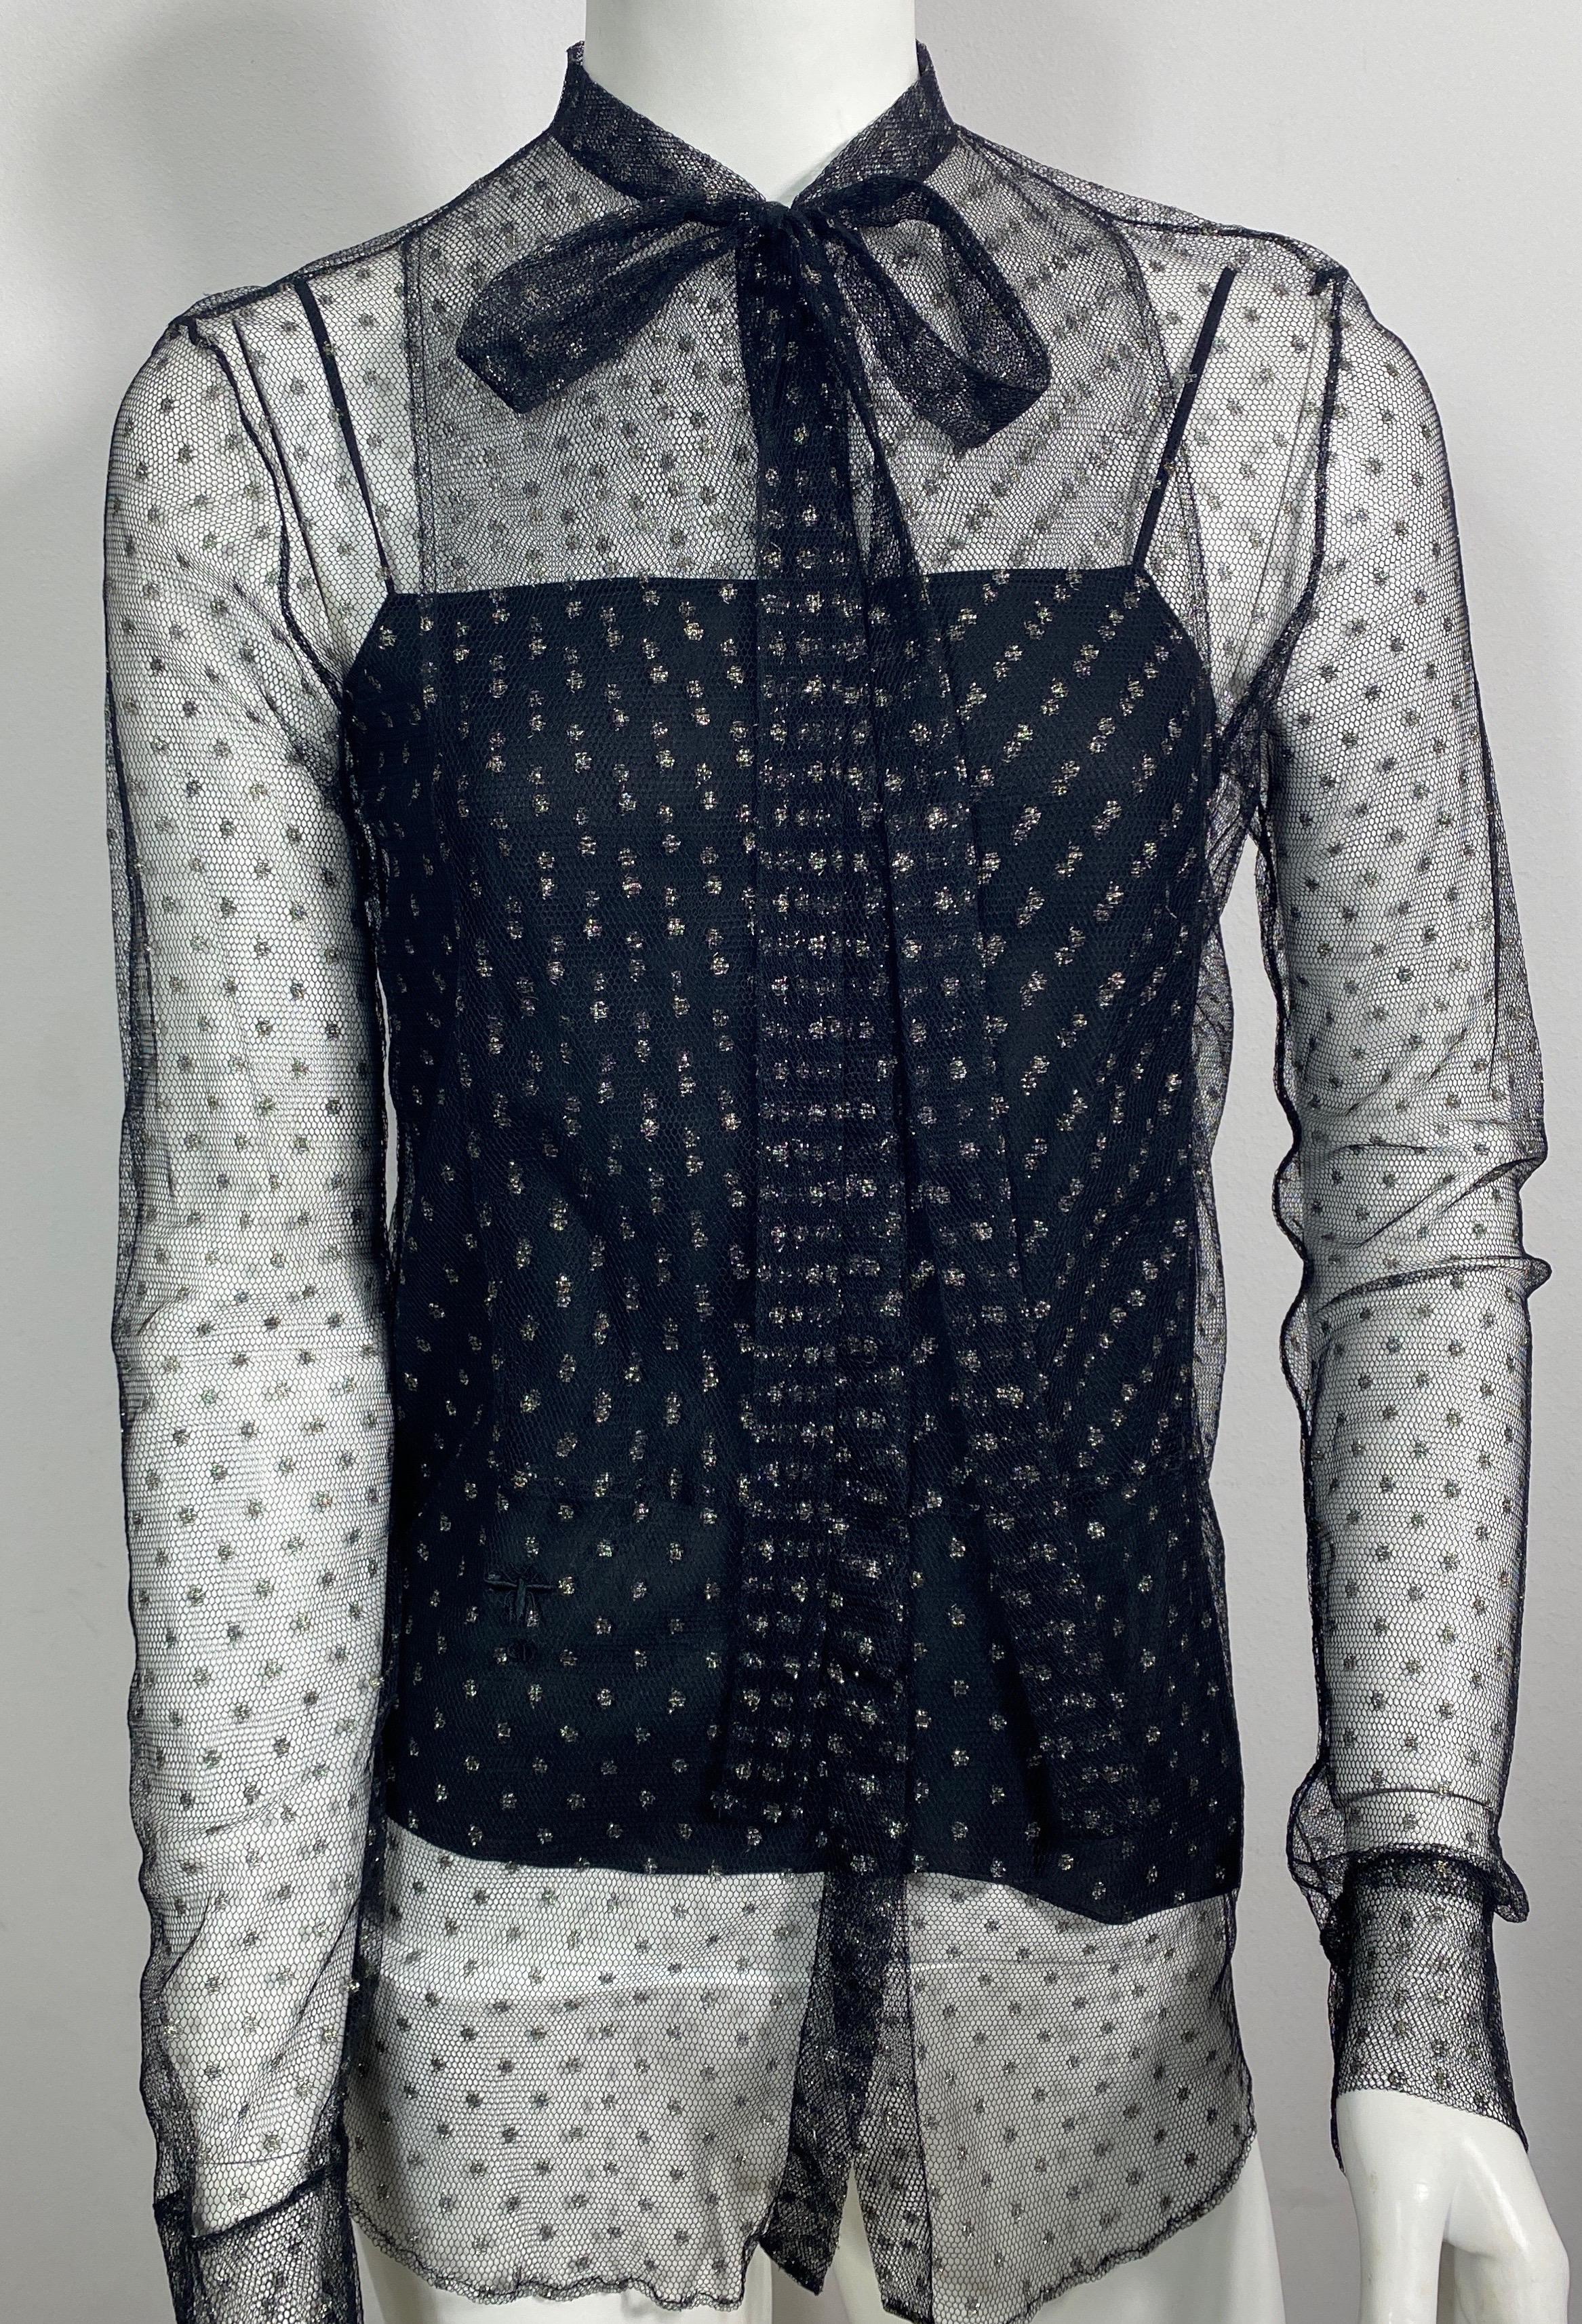 Christian Dior Black and Gold Mini Polka Dot Sheer Mesh Top - Size Small In Excellent Condition For Sale In West Palm Beach, FL